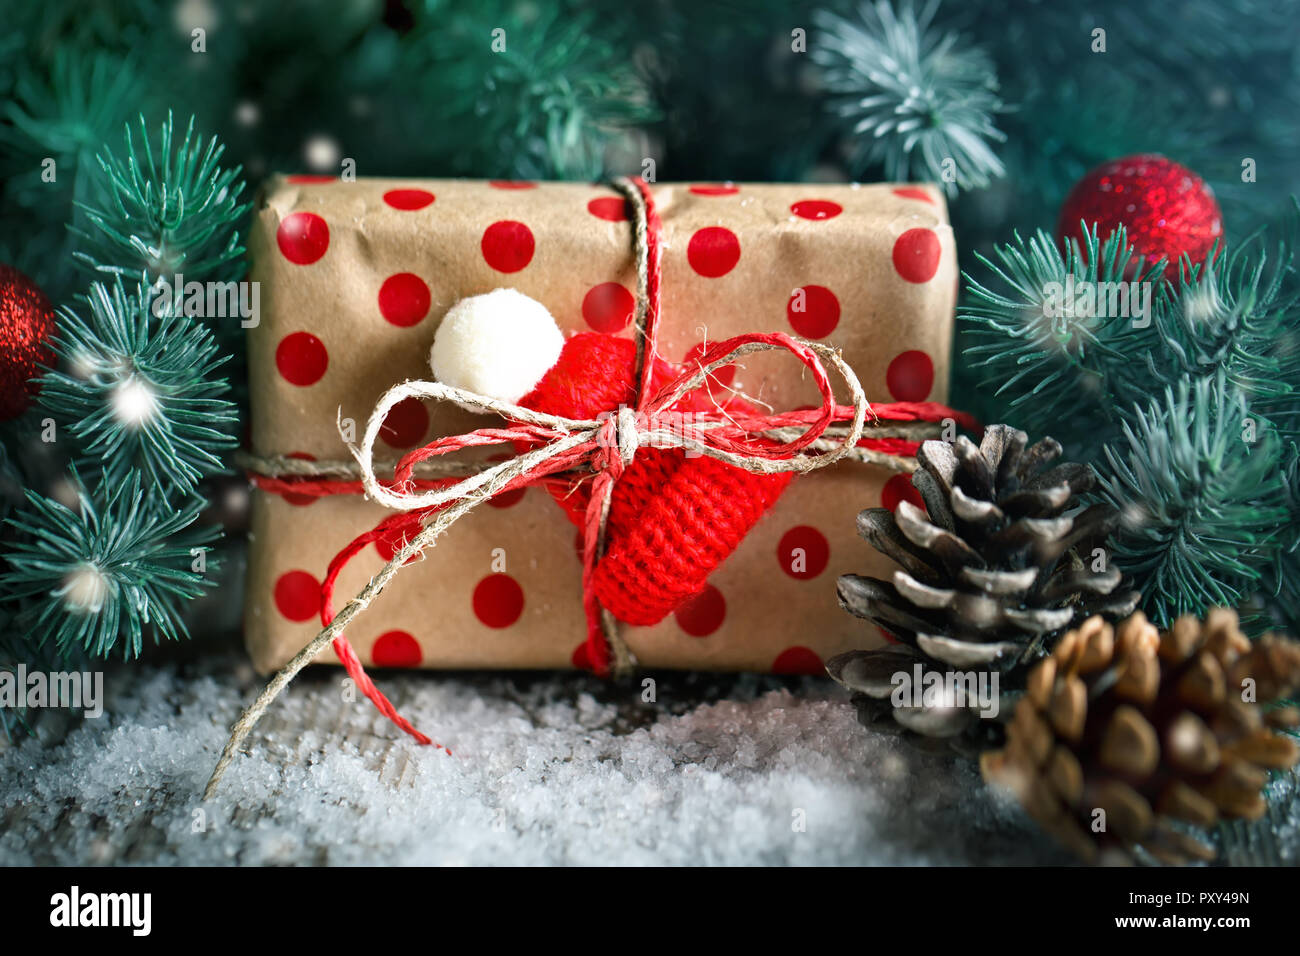 Merry Christmas And Happy New Year Wooden Table Decorated With Christmas Gifts Background With Copy Space Horizontal Stock Photo Alamy